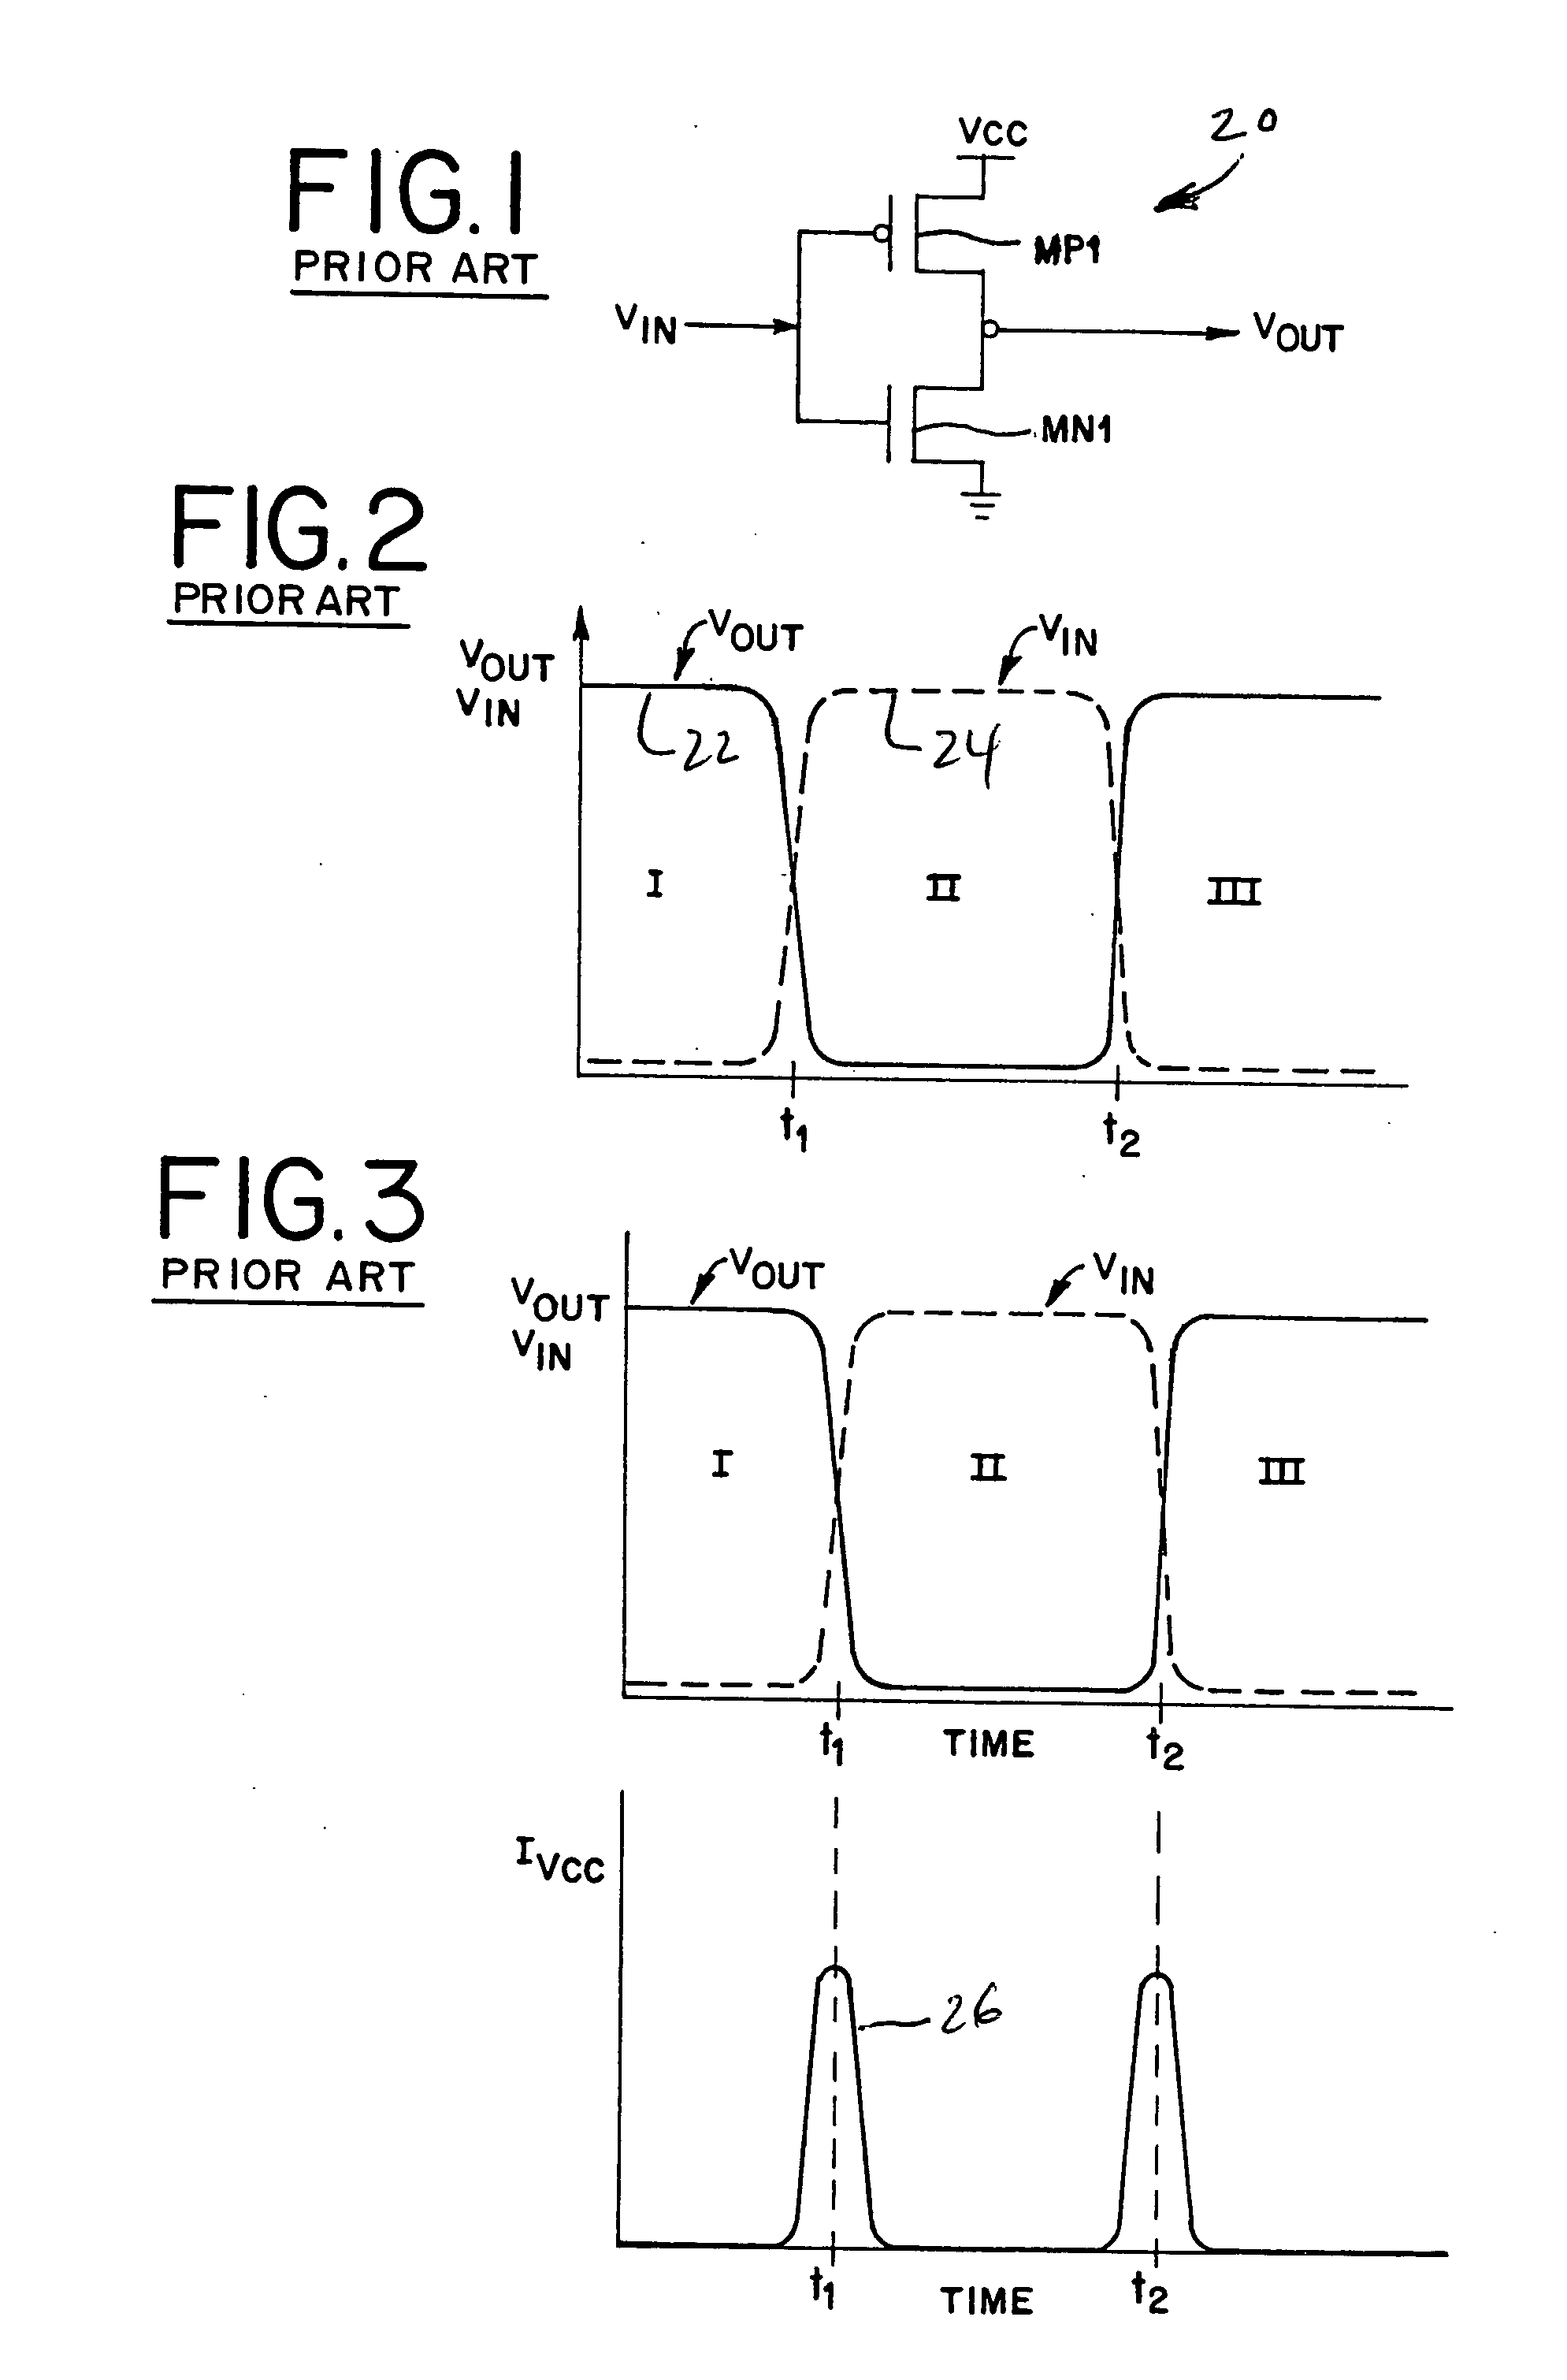 Apparatus and methods for saving power and reducing noise in integrated circuits